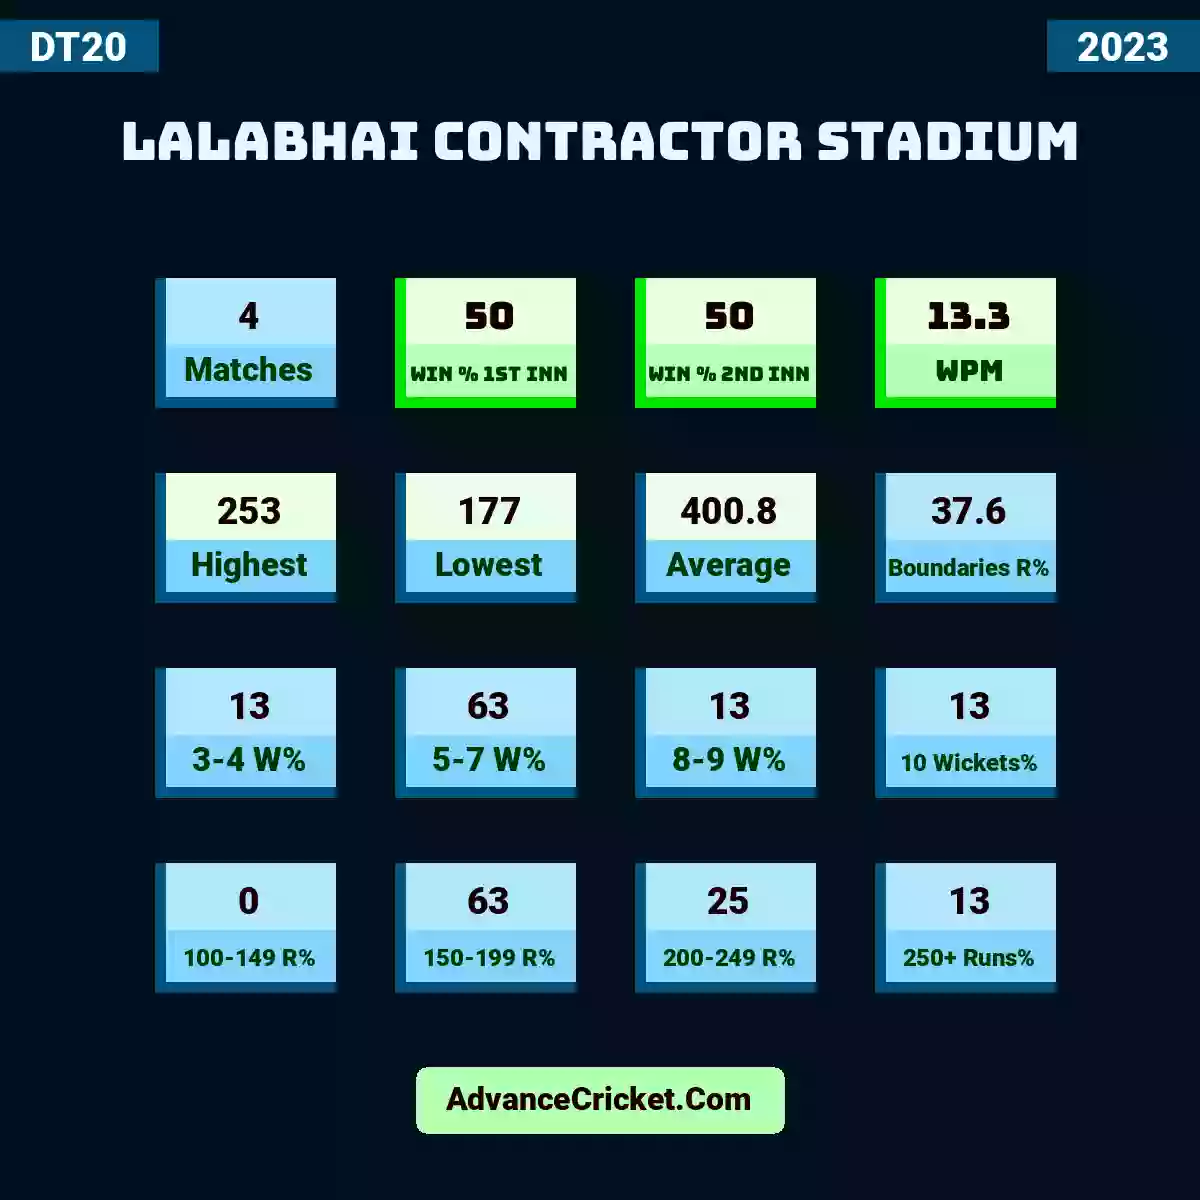 Image showing Lalabhai Contractor Stadium with Matches: 4, Win % 1st Inn: 50, Win % 2nd Inn: 50, WPM: 13.3, Highest: 253, Lowest: 177, Average: 400.8, Boundaries R%: 37.6, 3-4 W%: 13, 5-7 W%: 63, 8-9 W%: 13, 10 Wickets%: 13, 100-149 R%: 0, 150-199 R%: 63, 200-249 R%: 25, 250+ Runs%: 13.